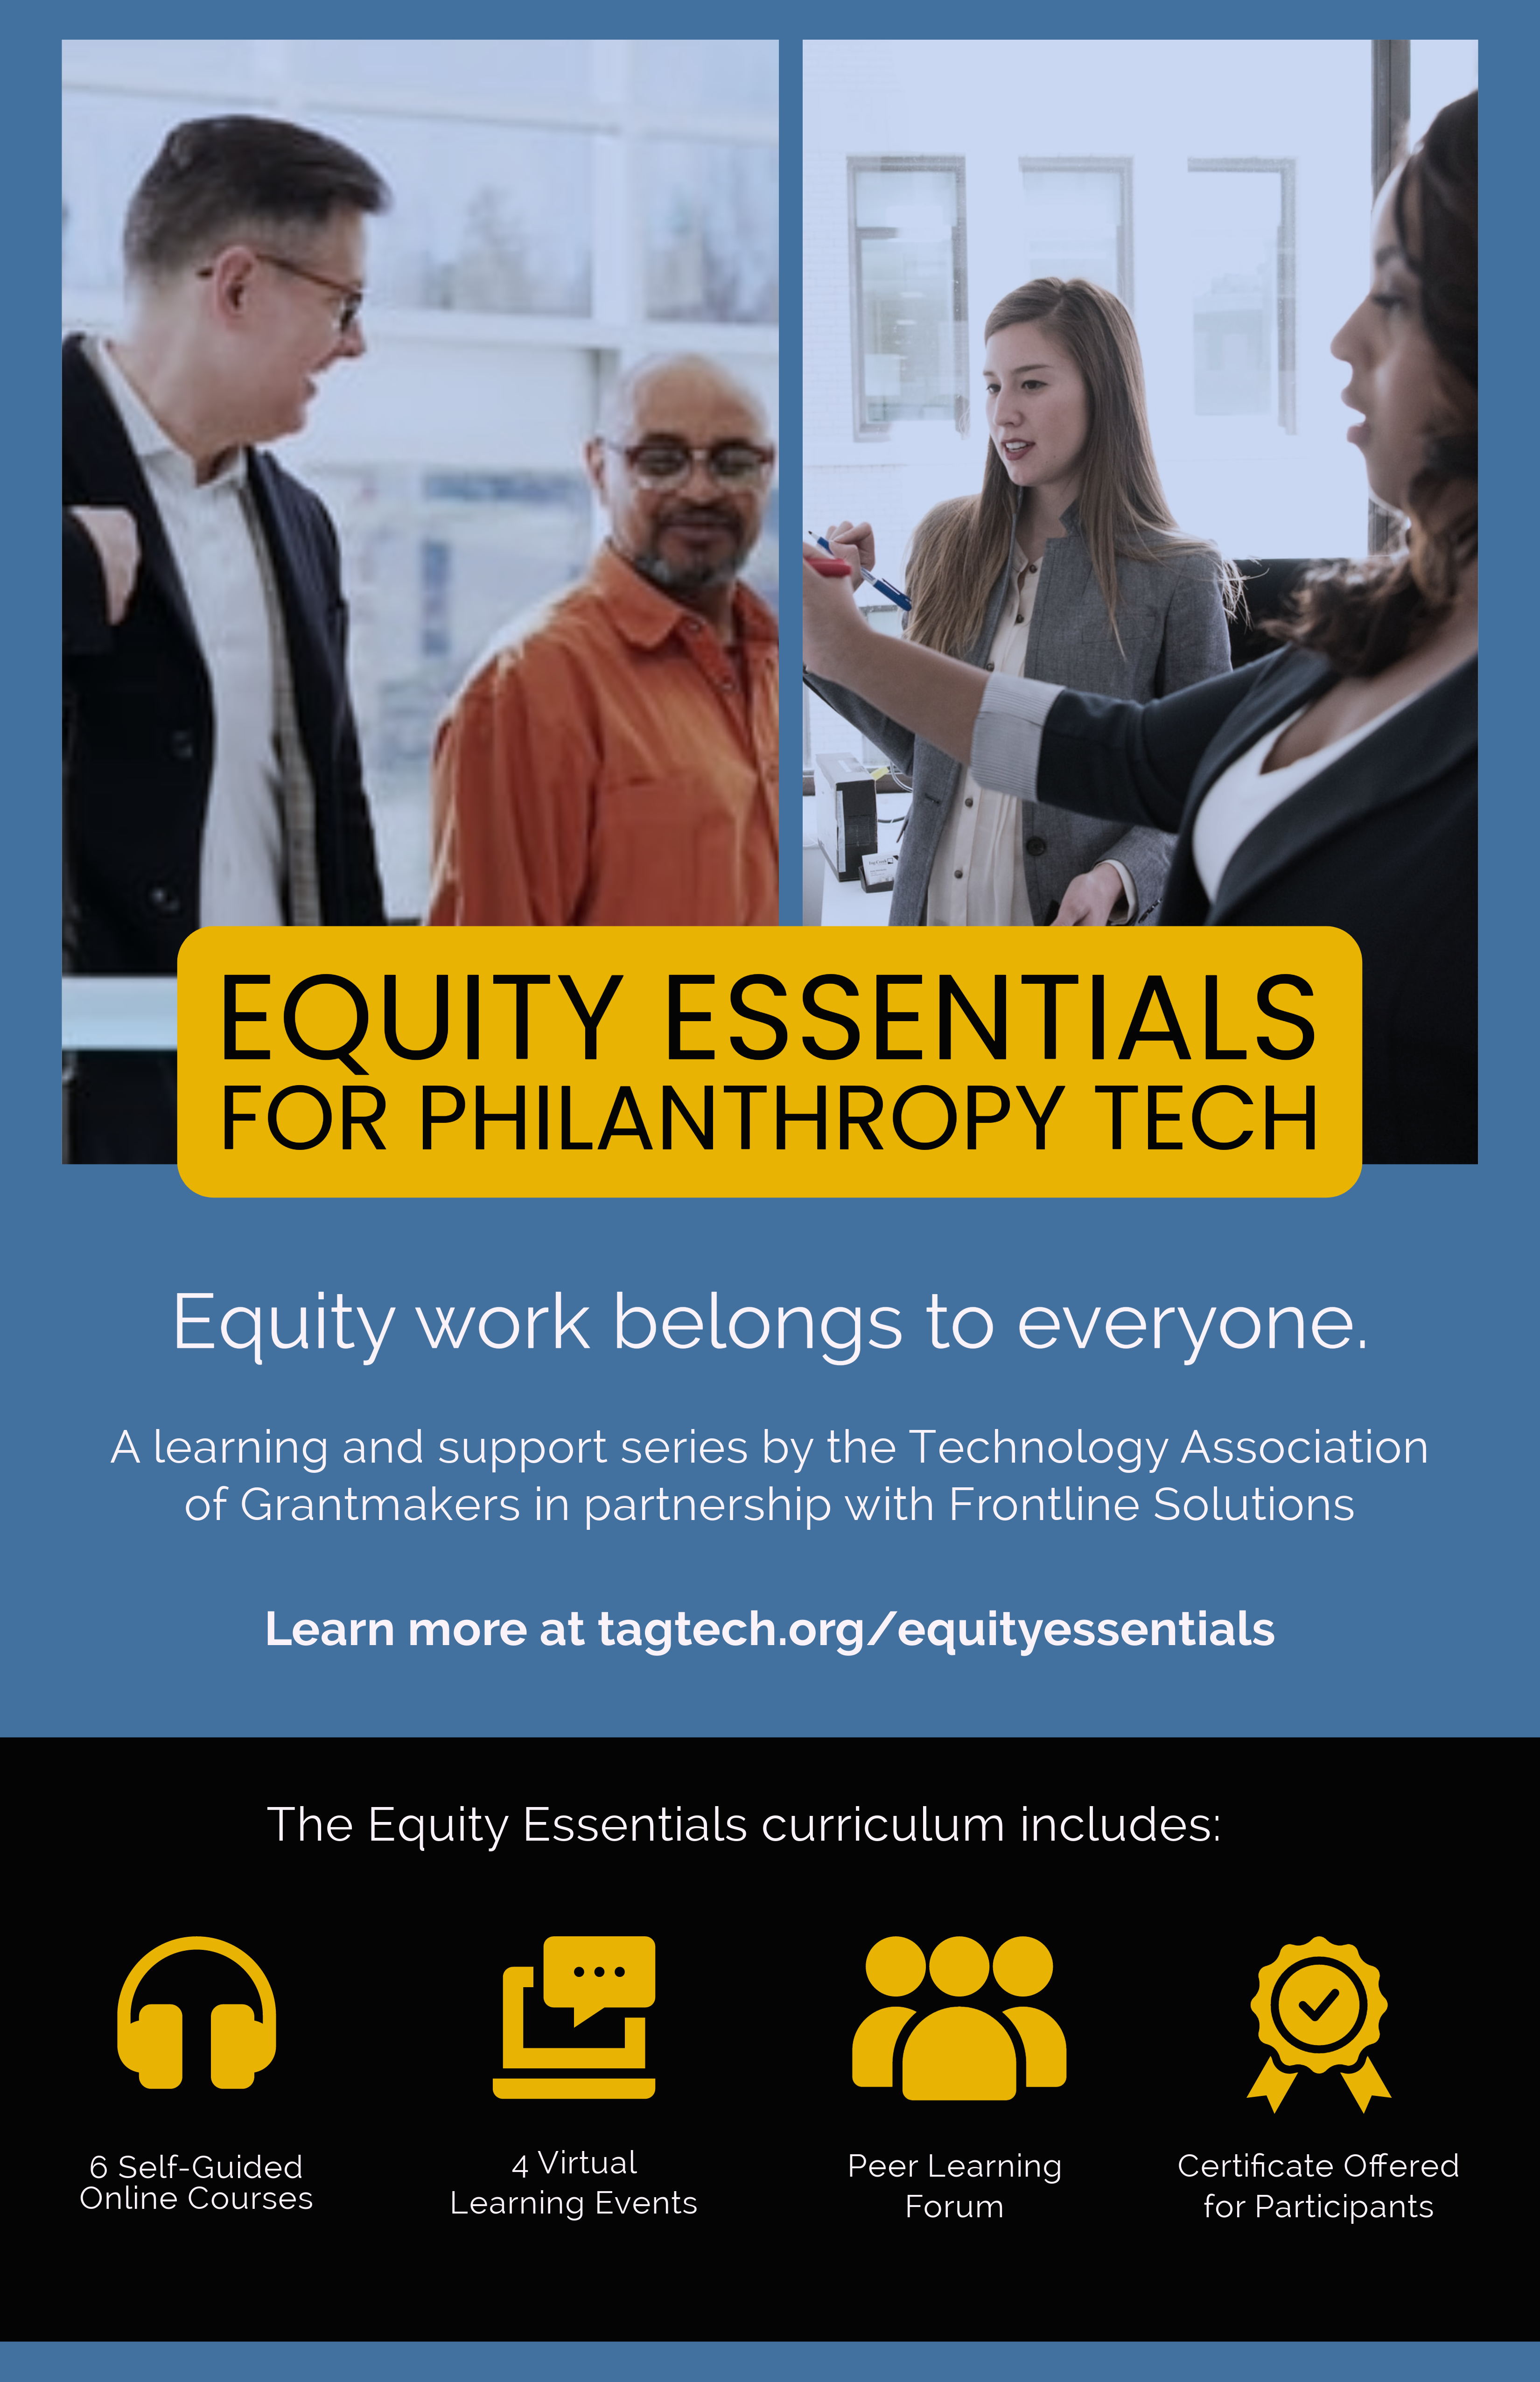 Equity Essentials for Philanthropy Tech, provided by TAG in partnership with Frontline Solutions.